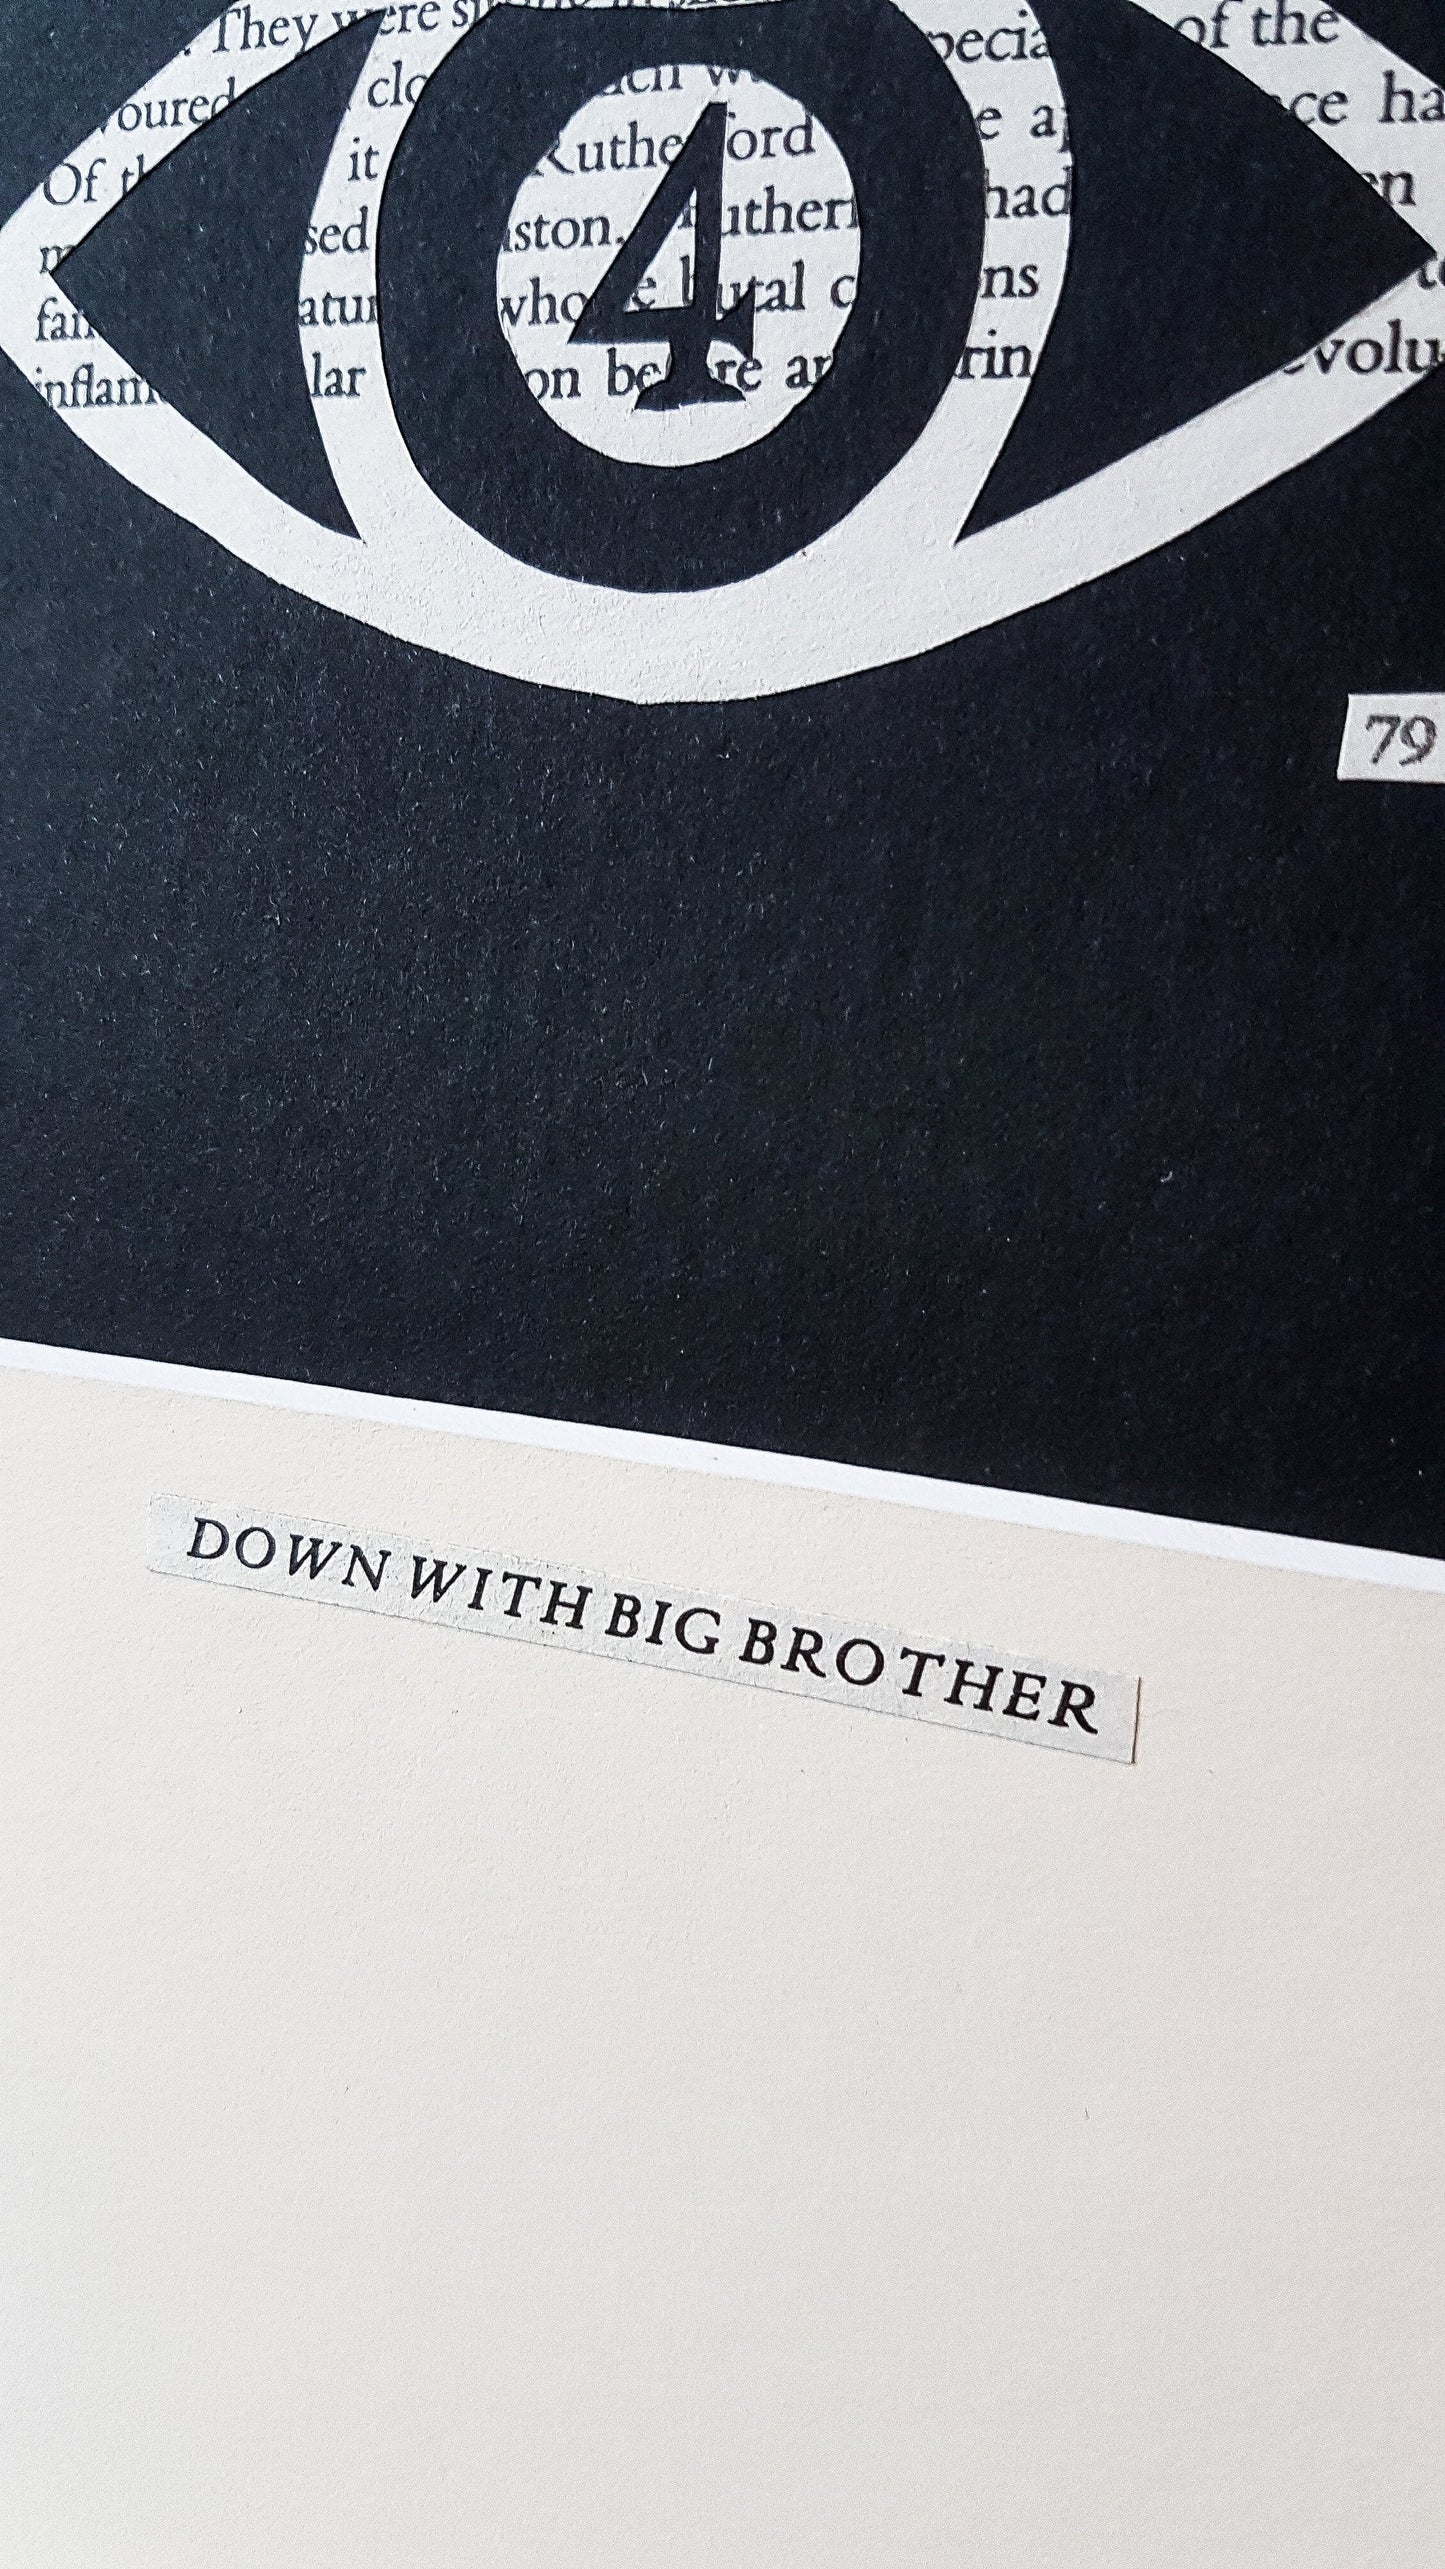 1984 "DOWN WITH BIG BROTHER 79" | Single Paper Cut | Limited Edition 1 of 1 - James Voce // artist